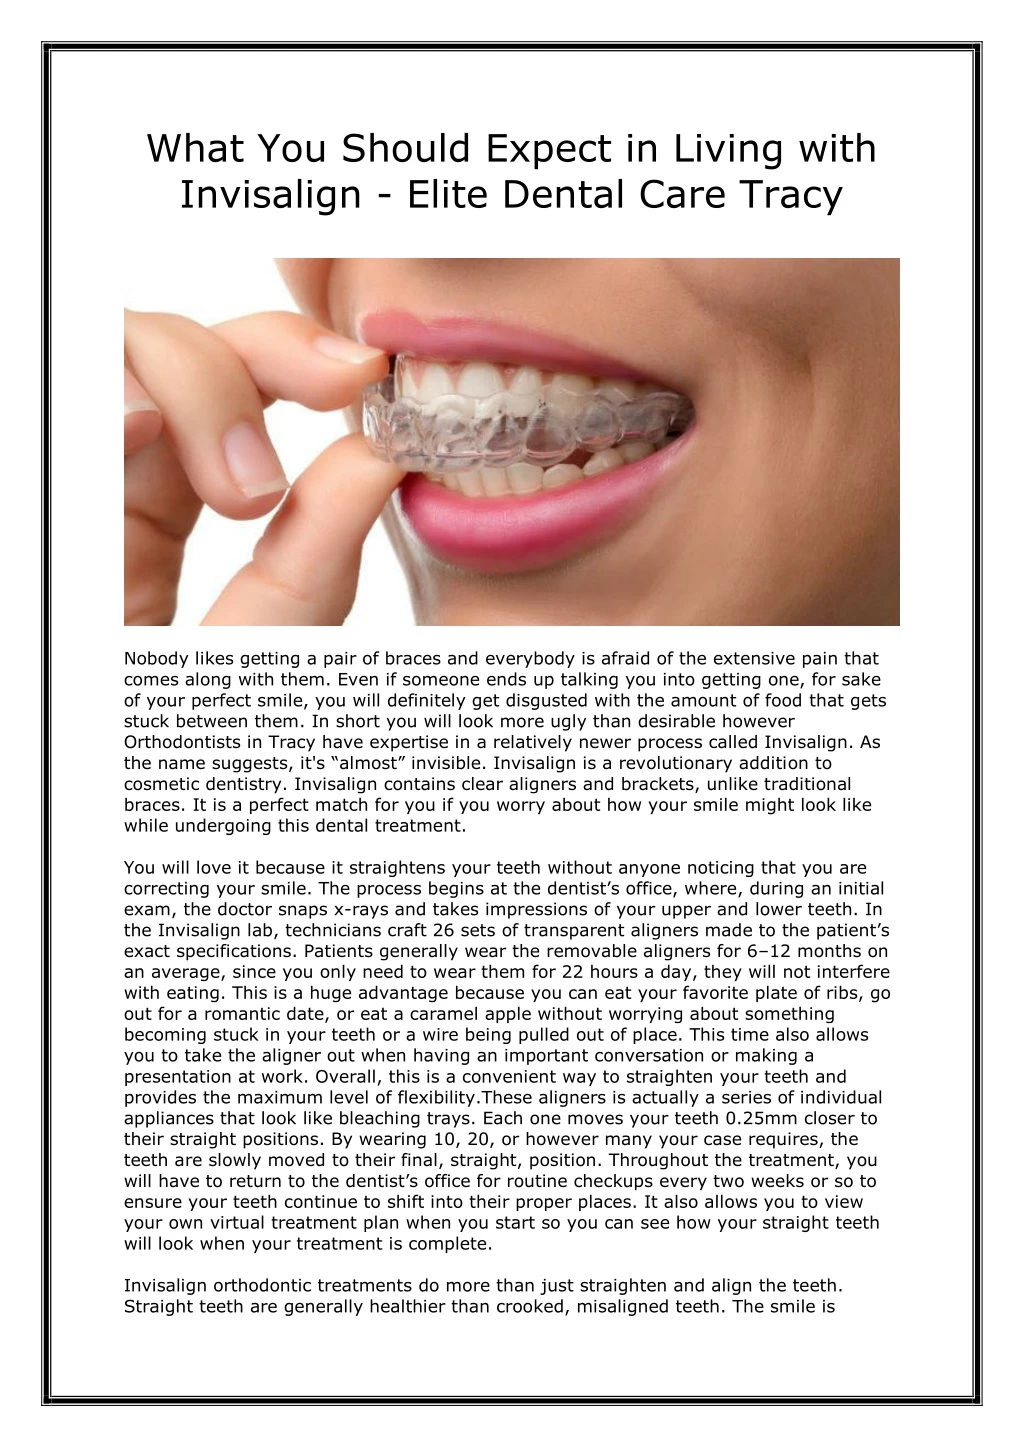 what you should expect in living with invisalign